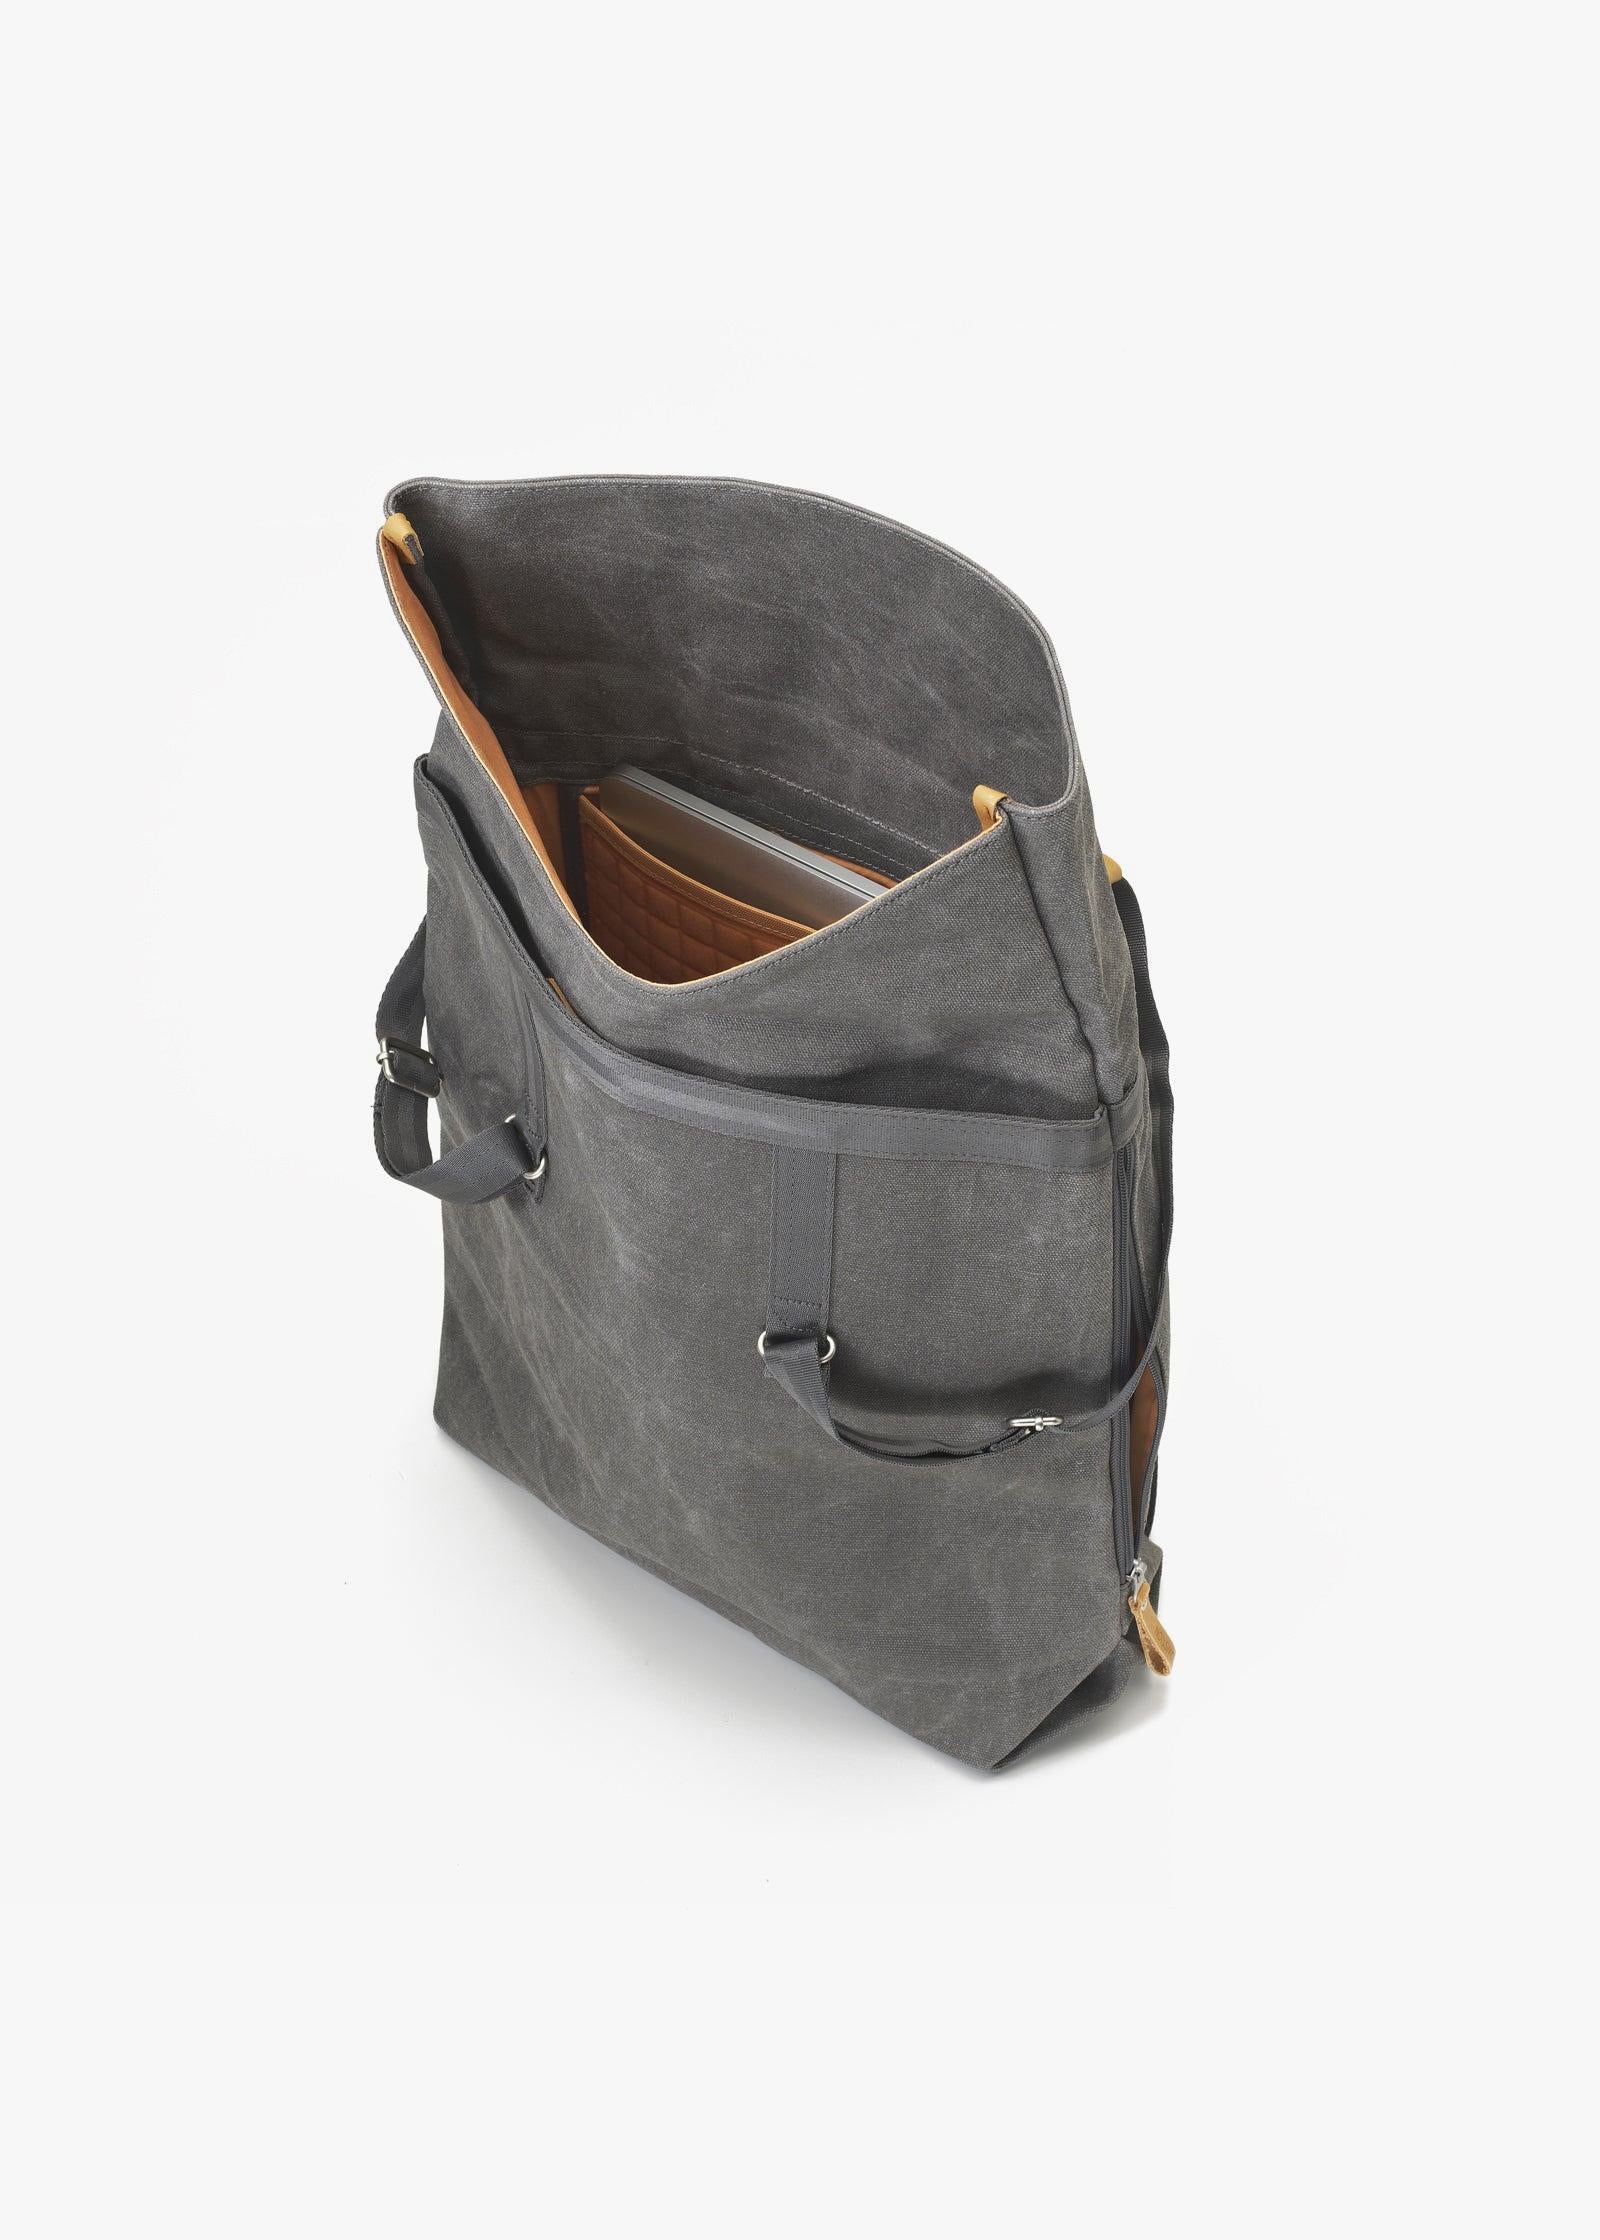 Day Tote – Organic Washed Grey